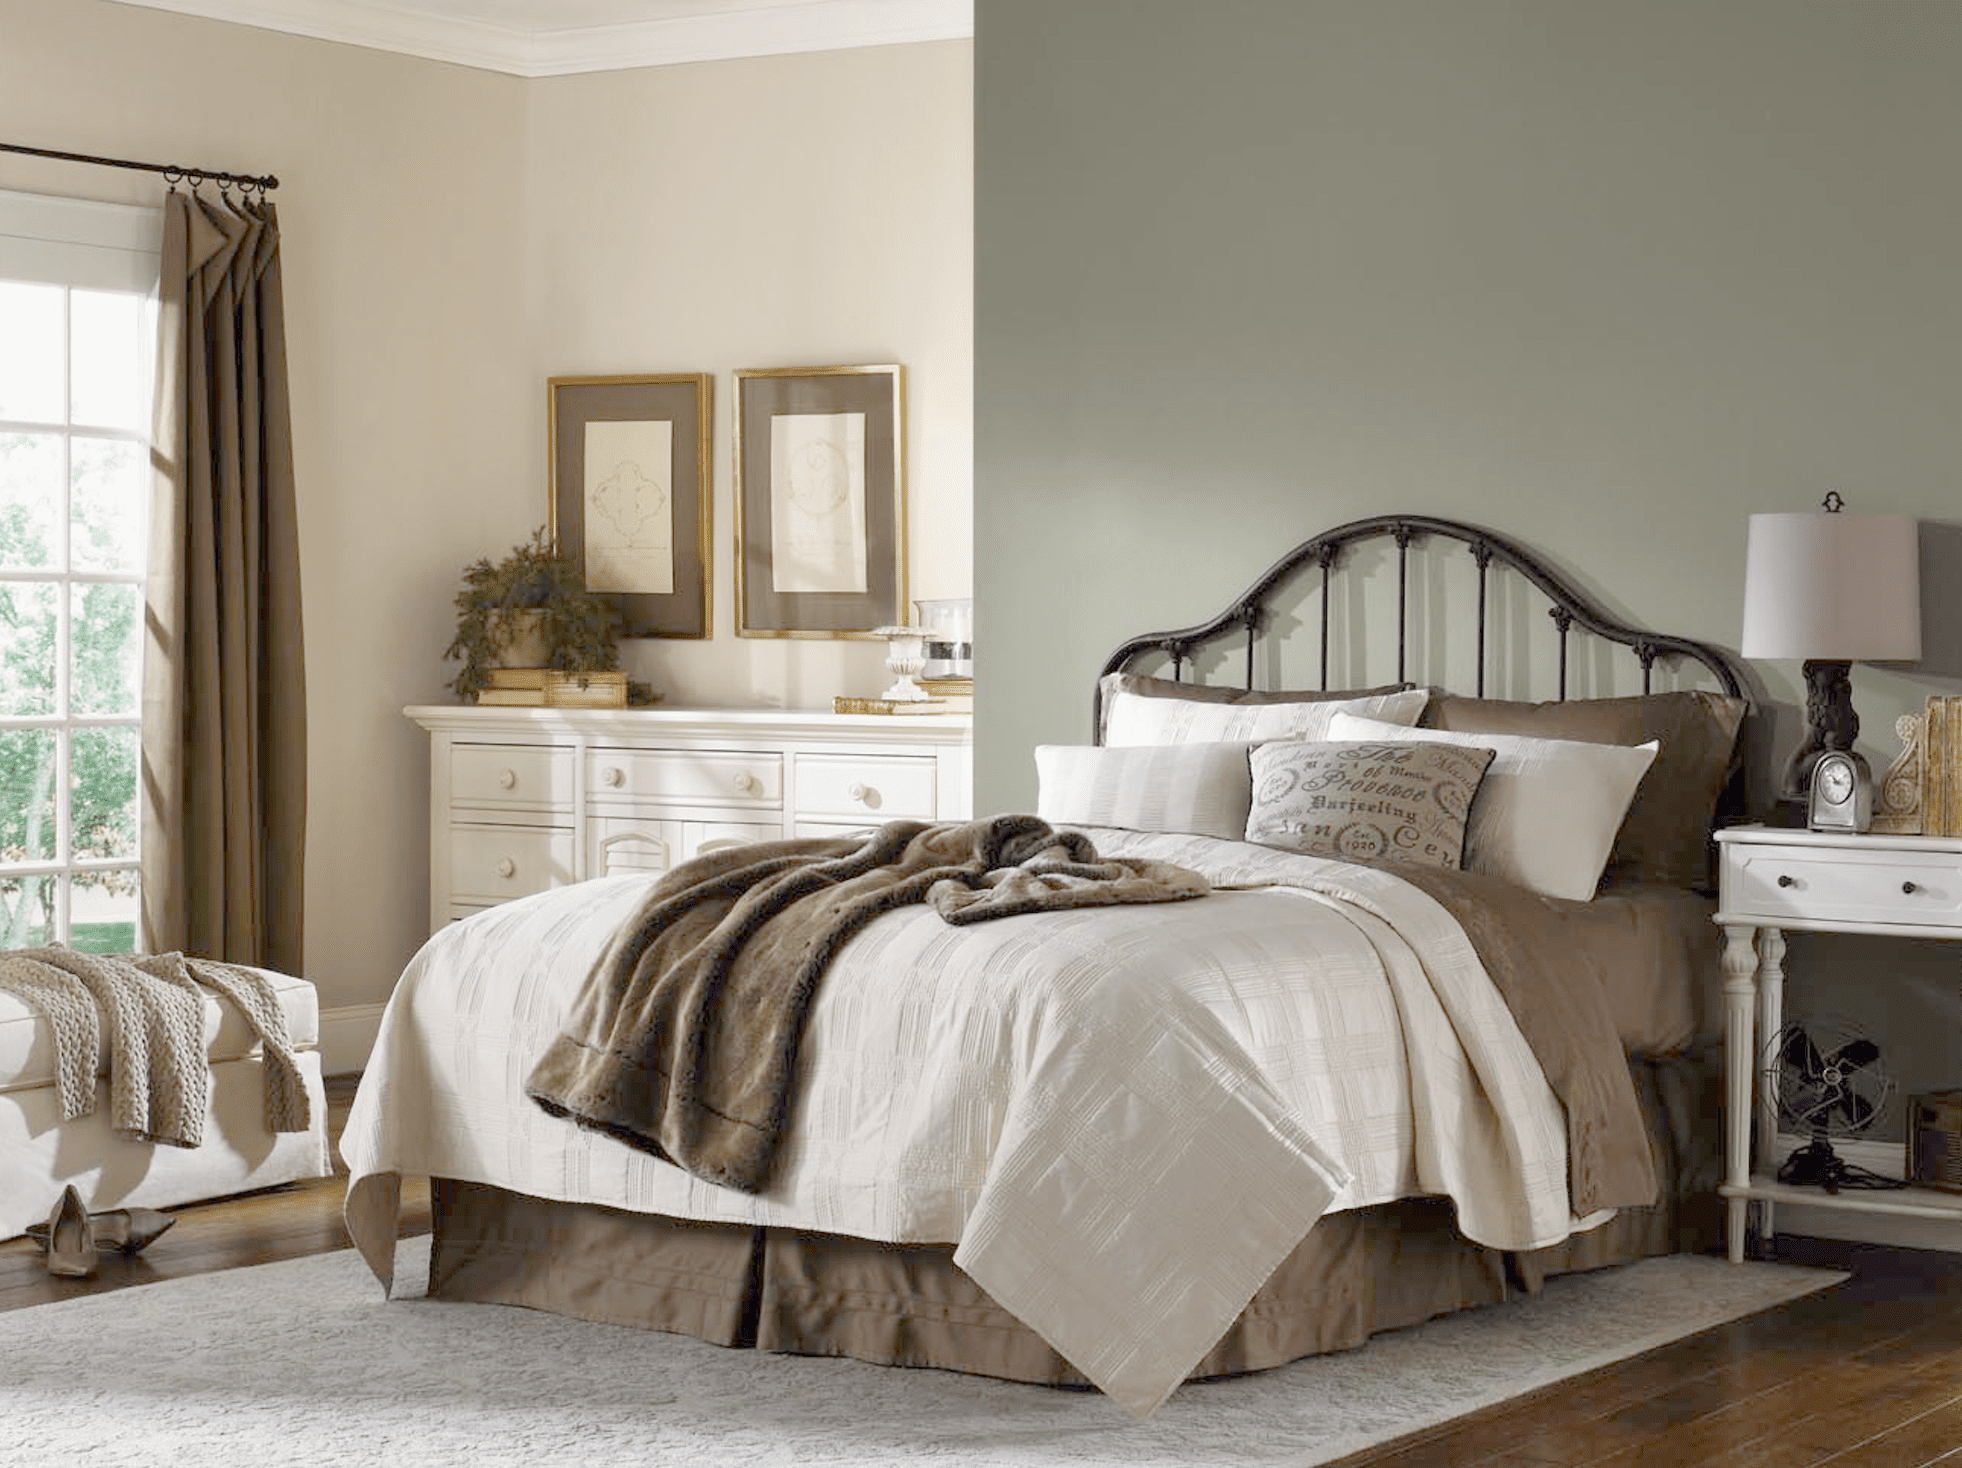 8 Relaxing Sherwin Williams Paint Colors For Bedrooms intended for dimensions 1962 X 1468